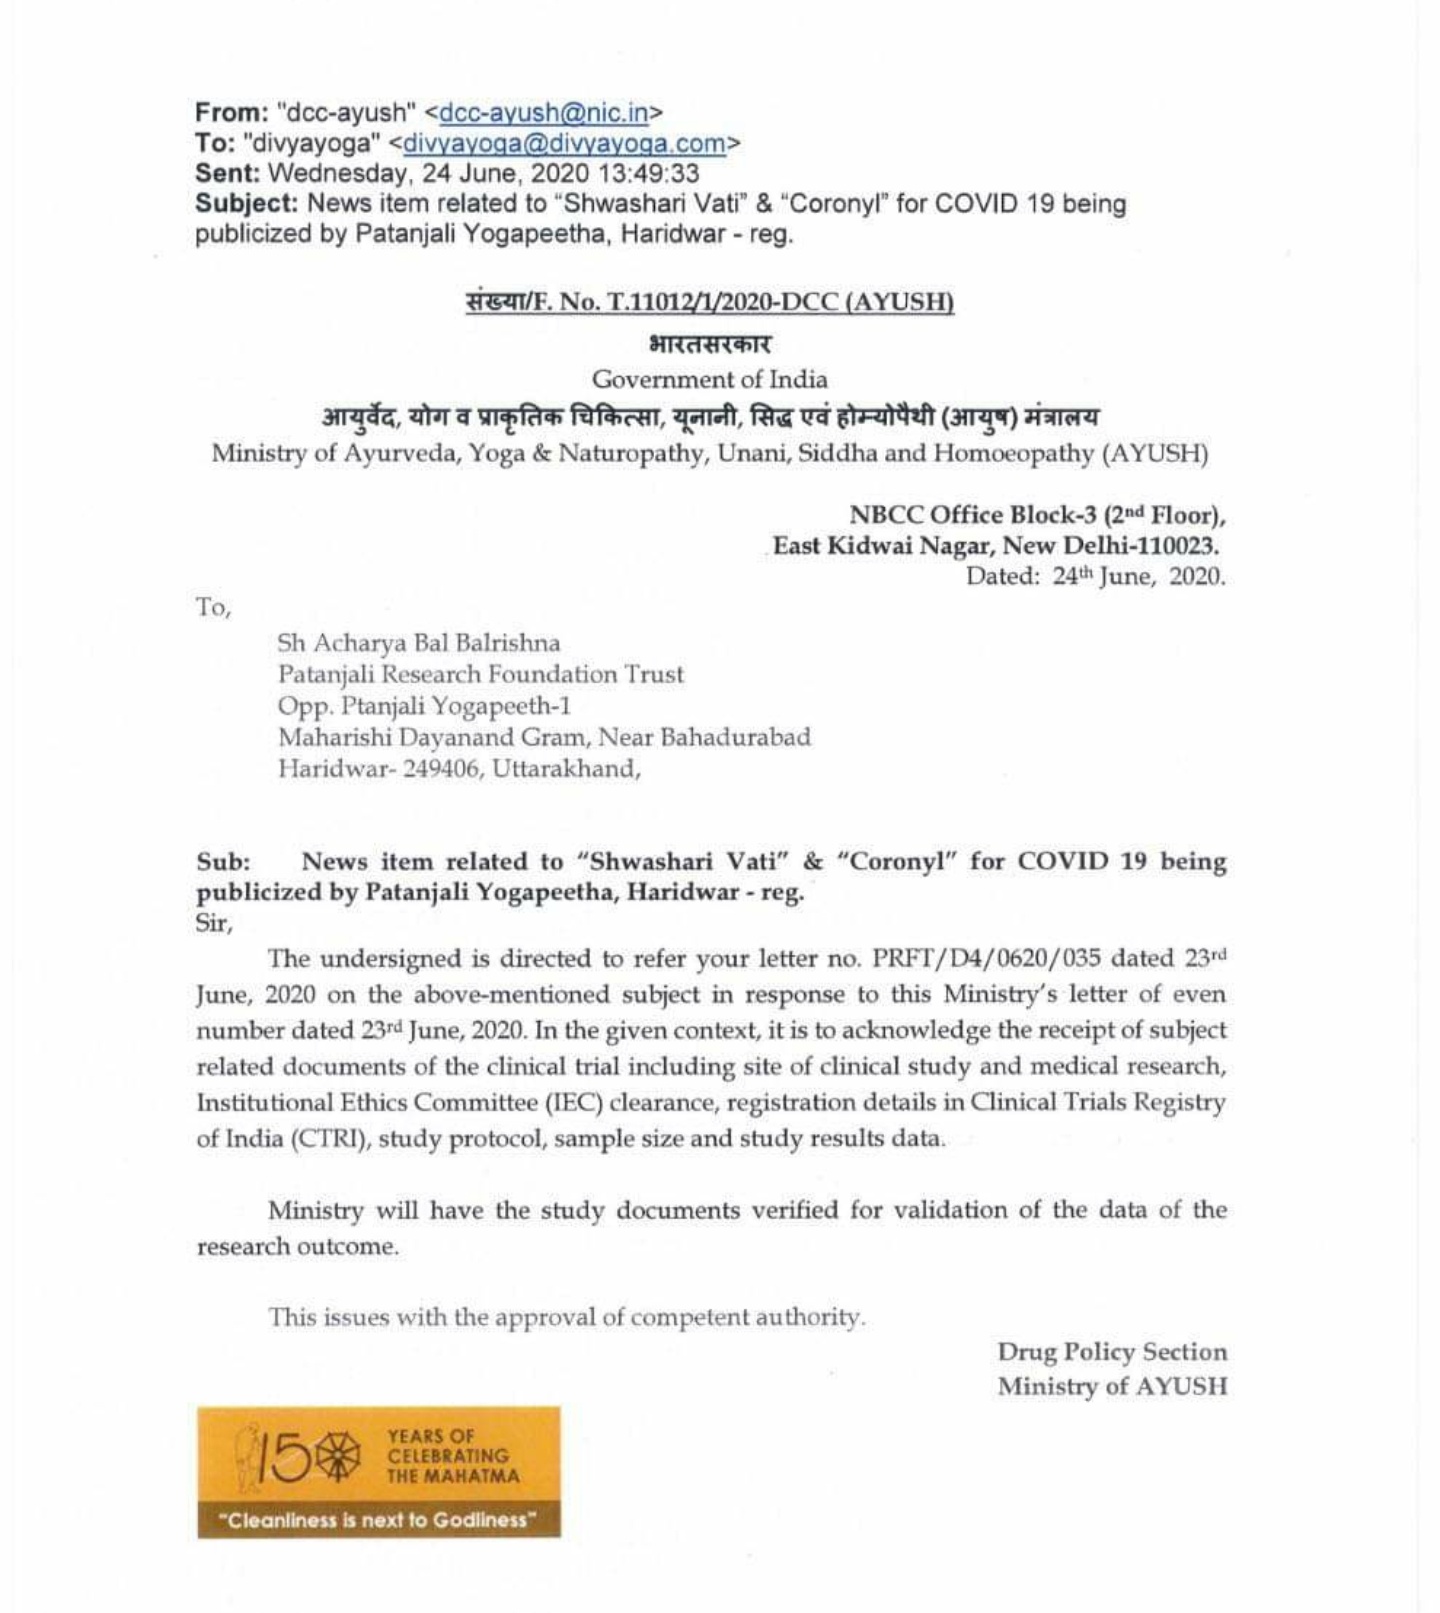 Letter sent by Ayush Ministry